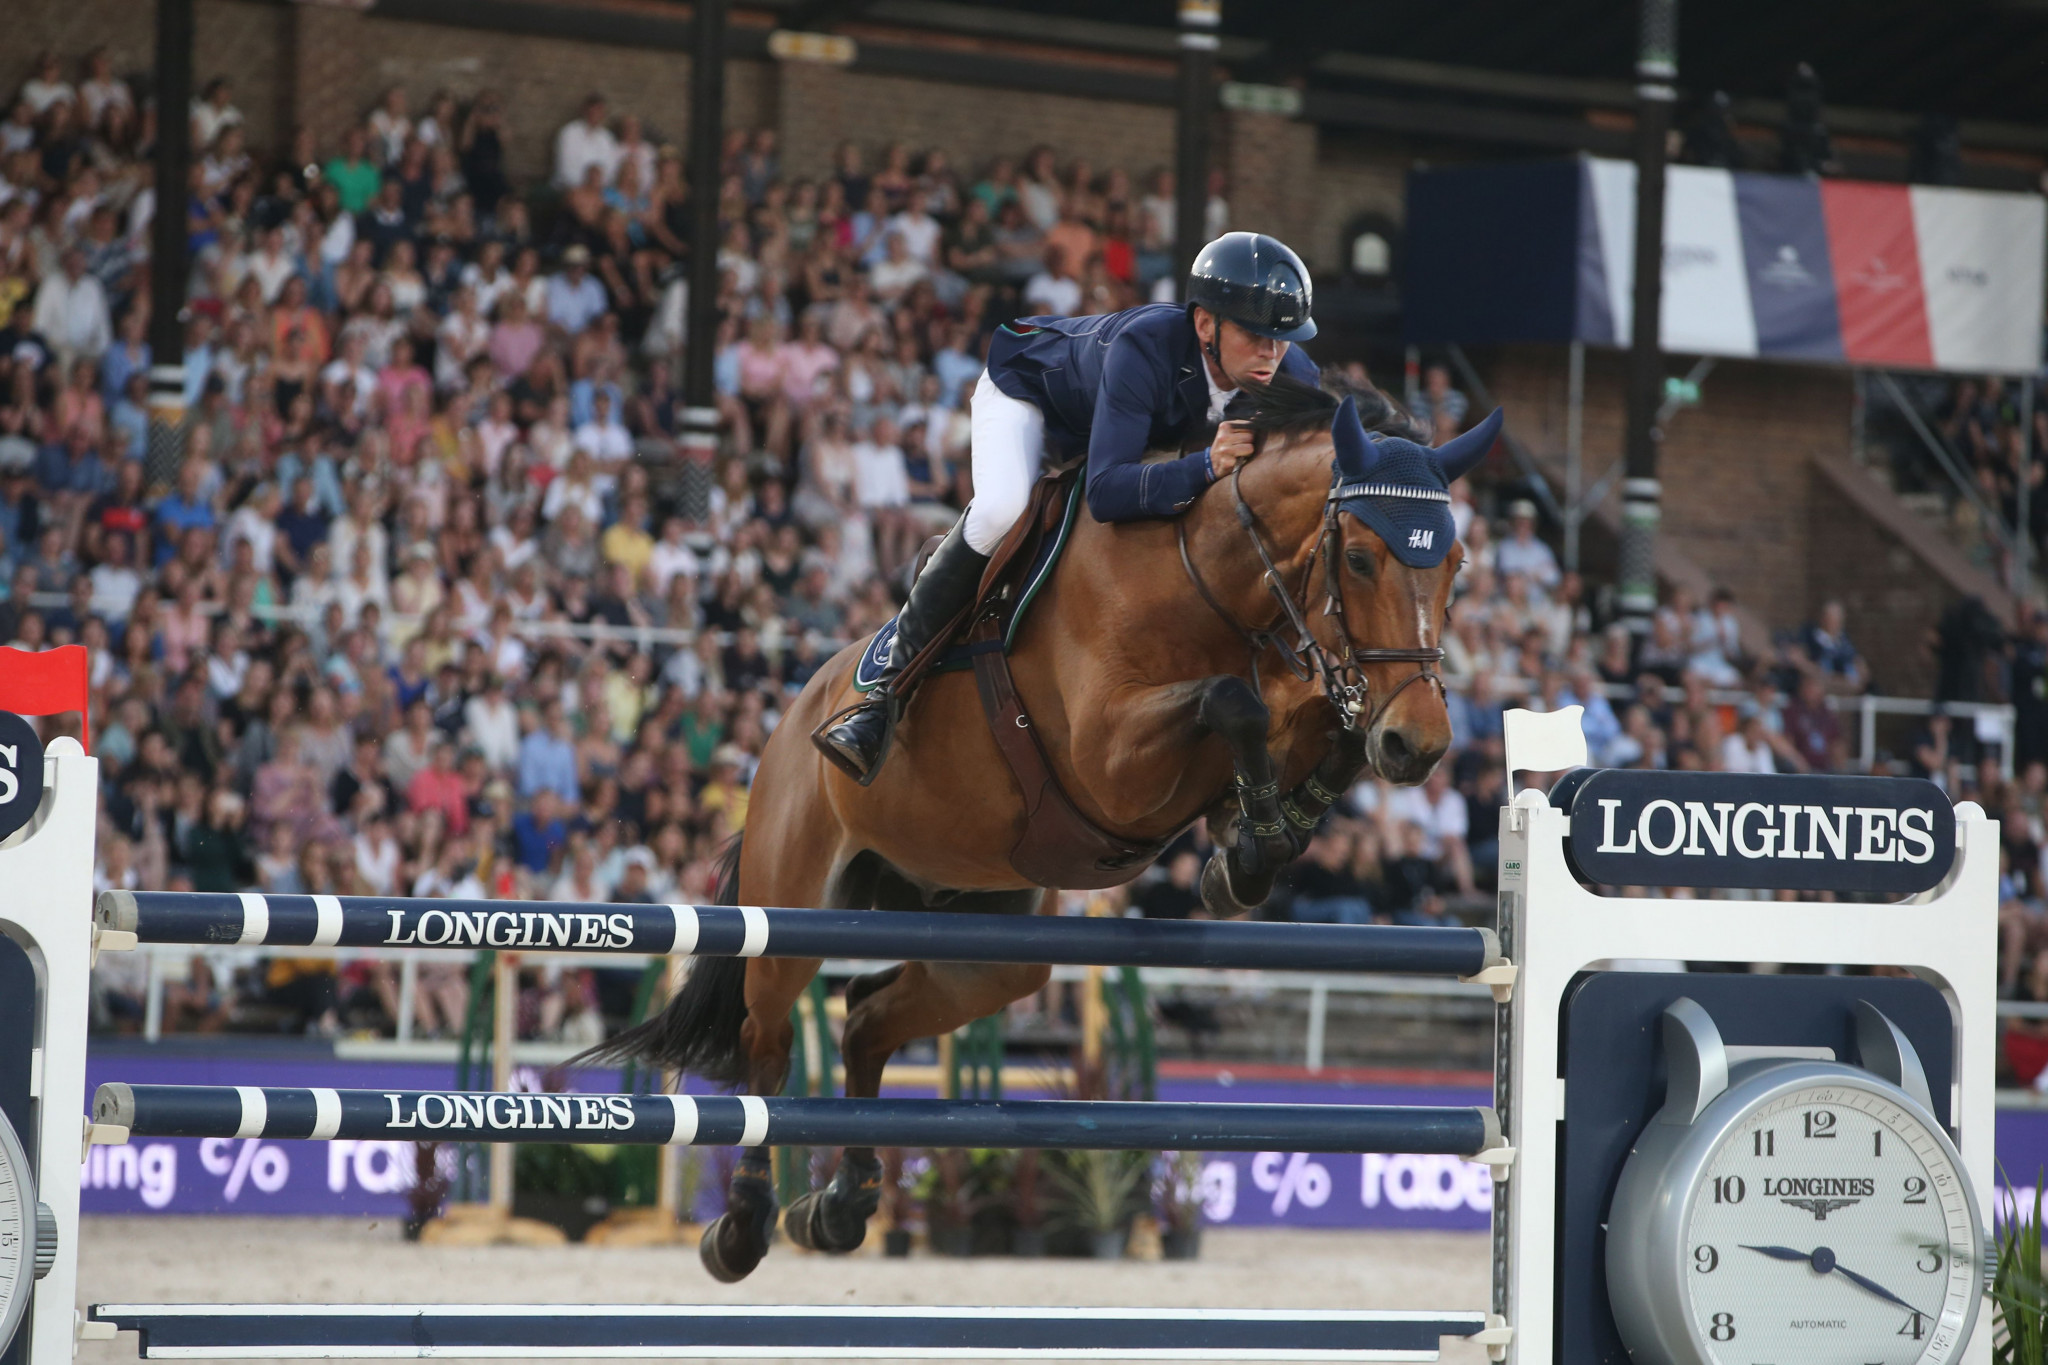 Peder Fredricson helped the Swedish team to victory at Hickstead ©Getty Images